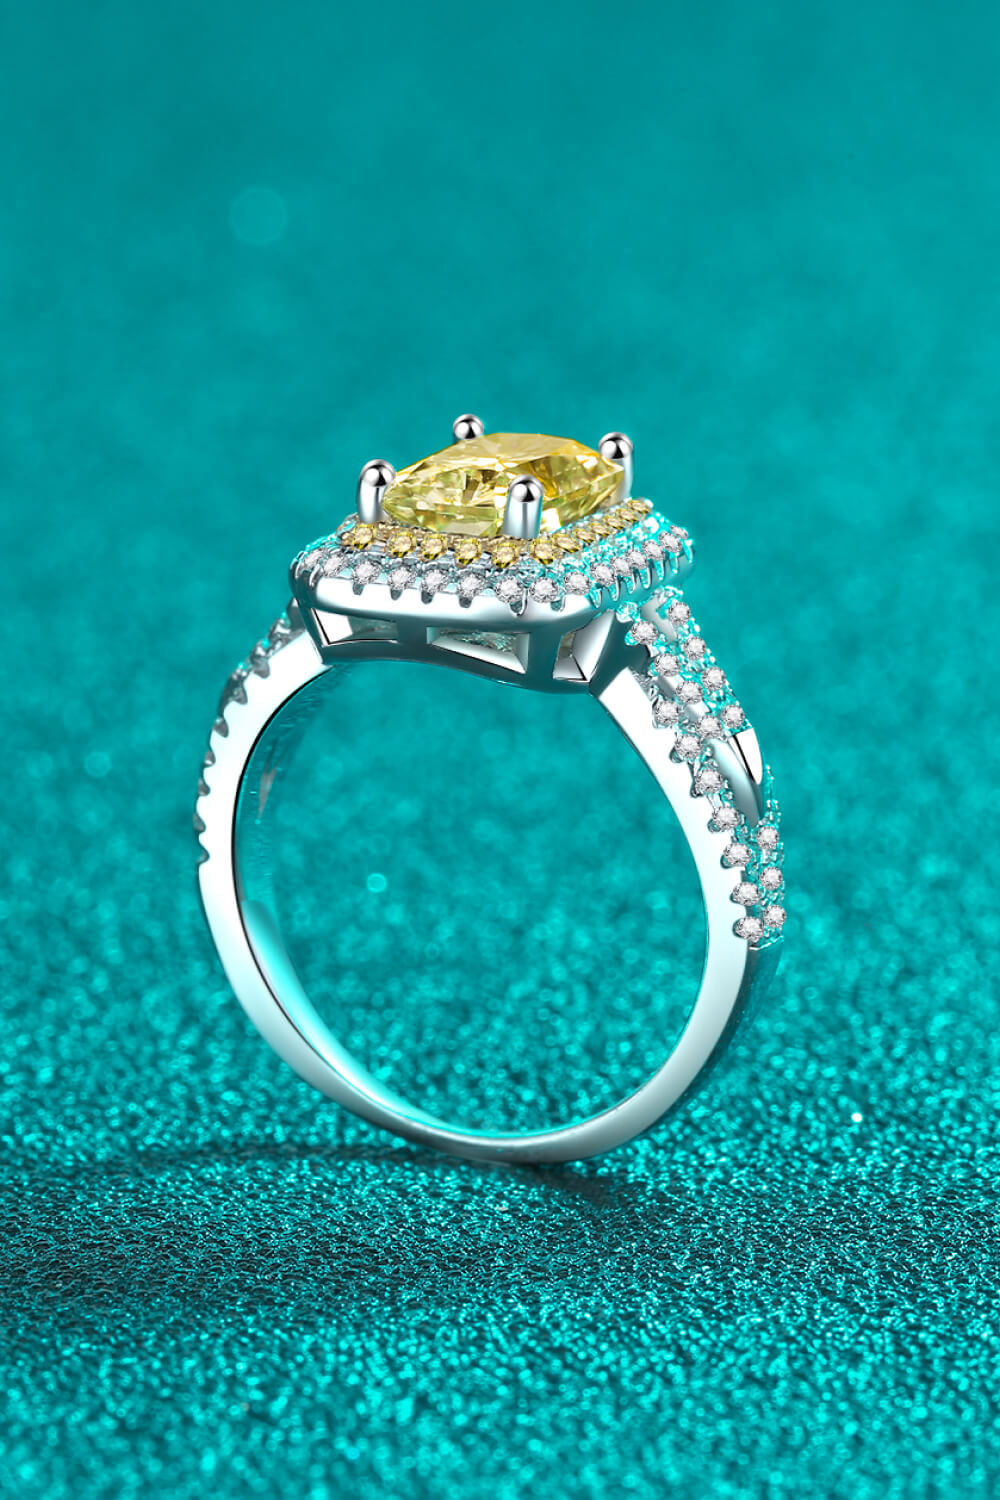 Can't Stop Your Shine 2 Carat Moissanite Ring COCO CRESS